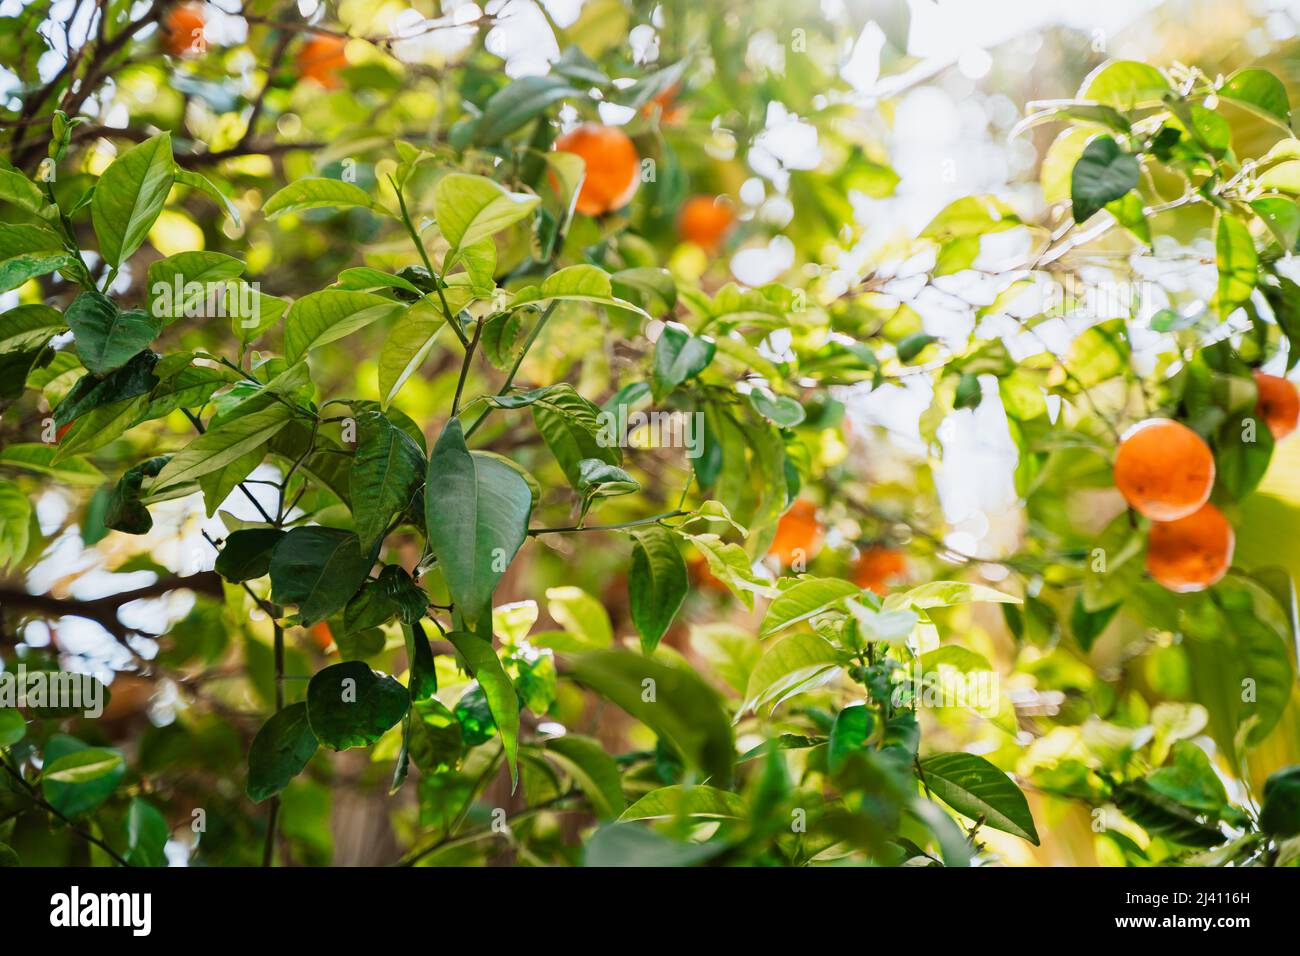 Ripe mandarin oranges hanging on tree branches close-up. Low angle photo of juicy citrus tangerines growing on tree Stock Photo